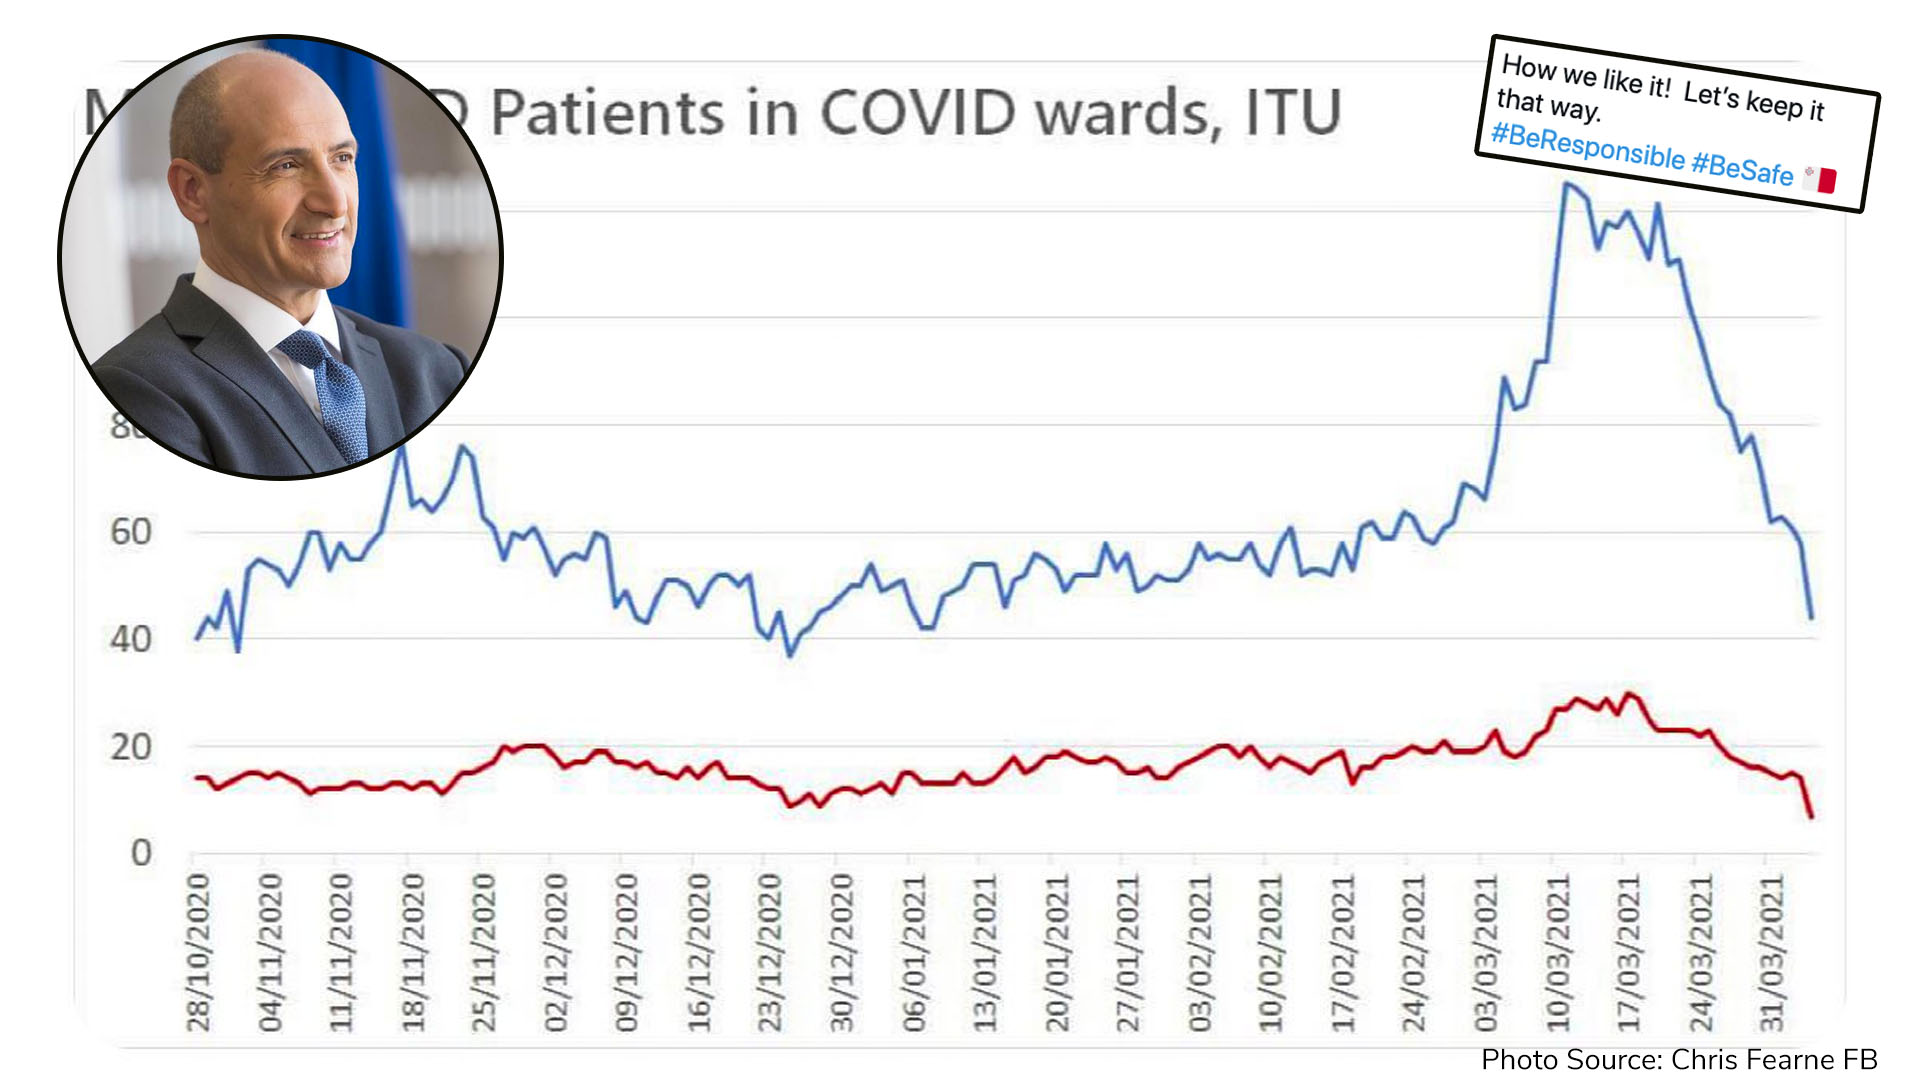 Significant drop in ITU COVID-19 patients and admissions